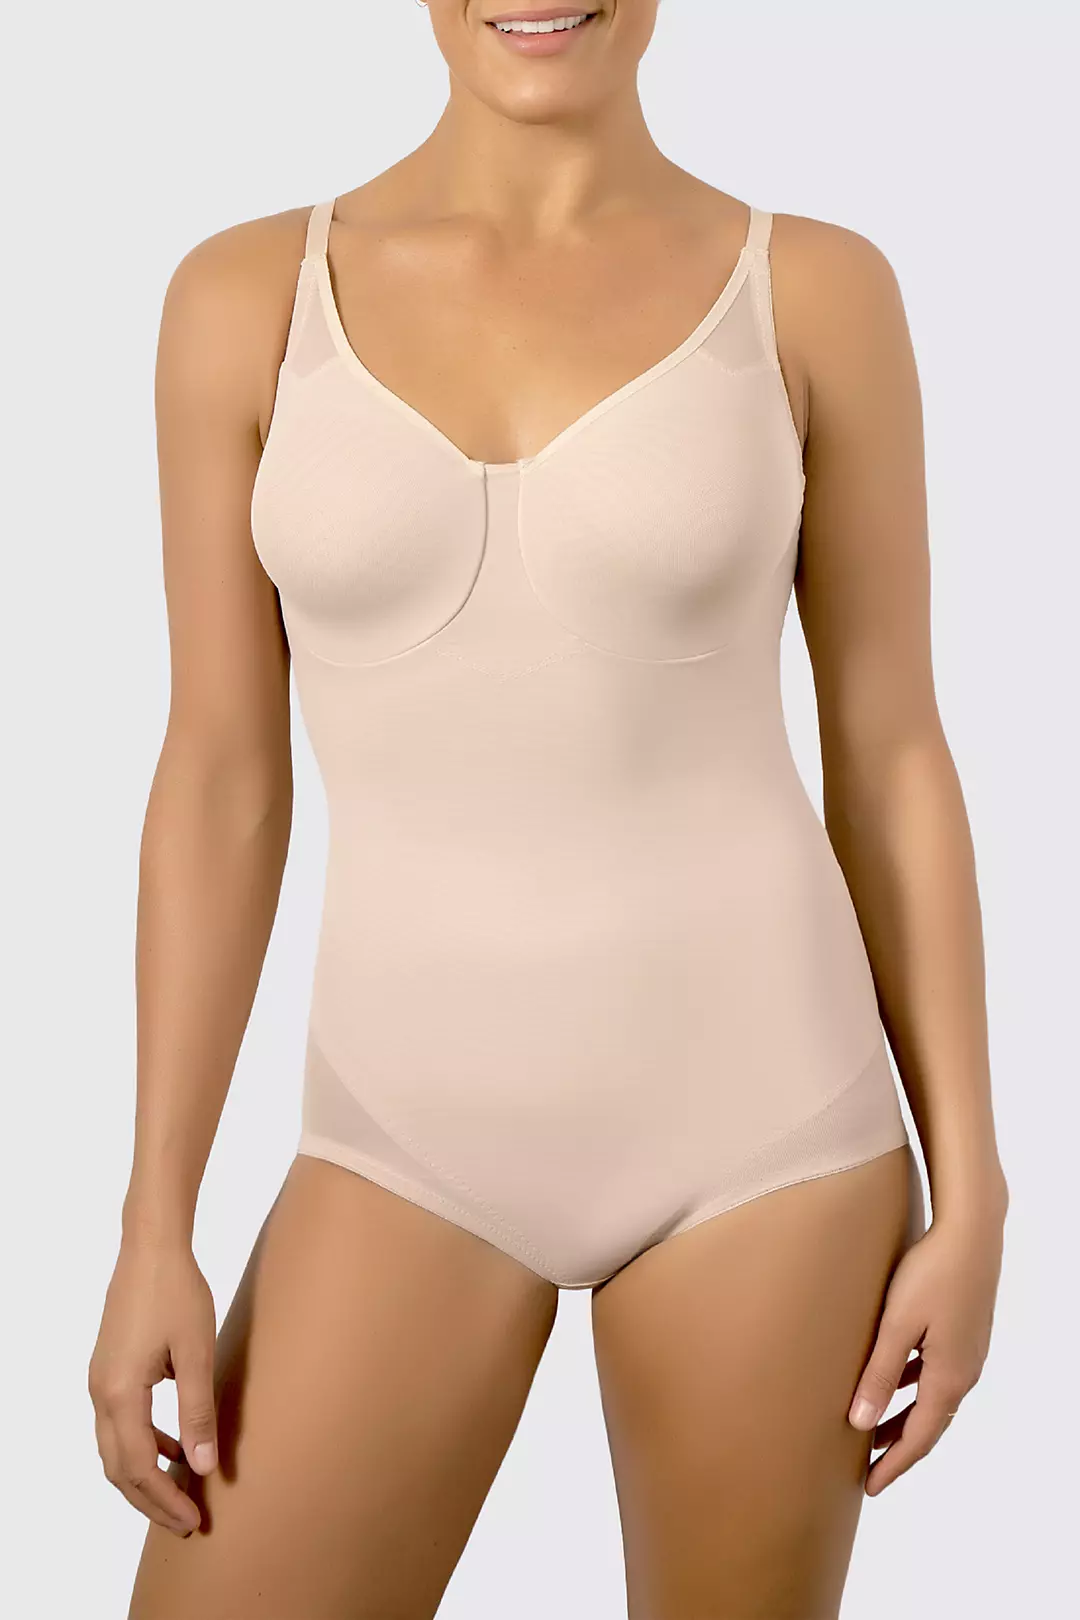 Miraclesuit Body Briefer